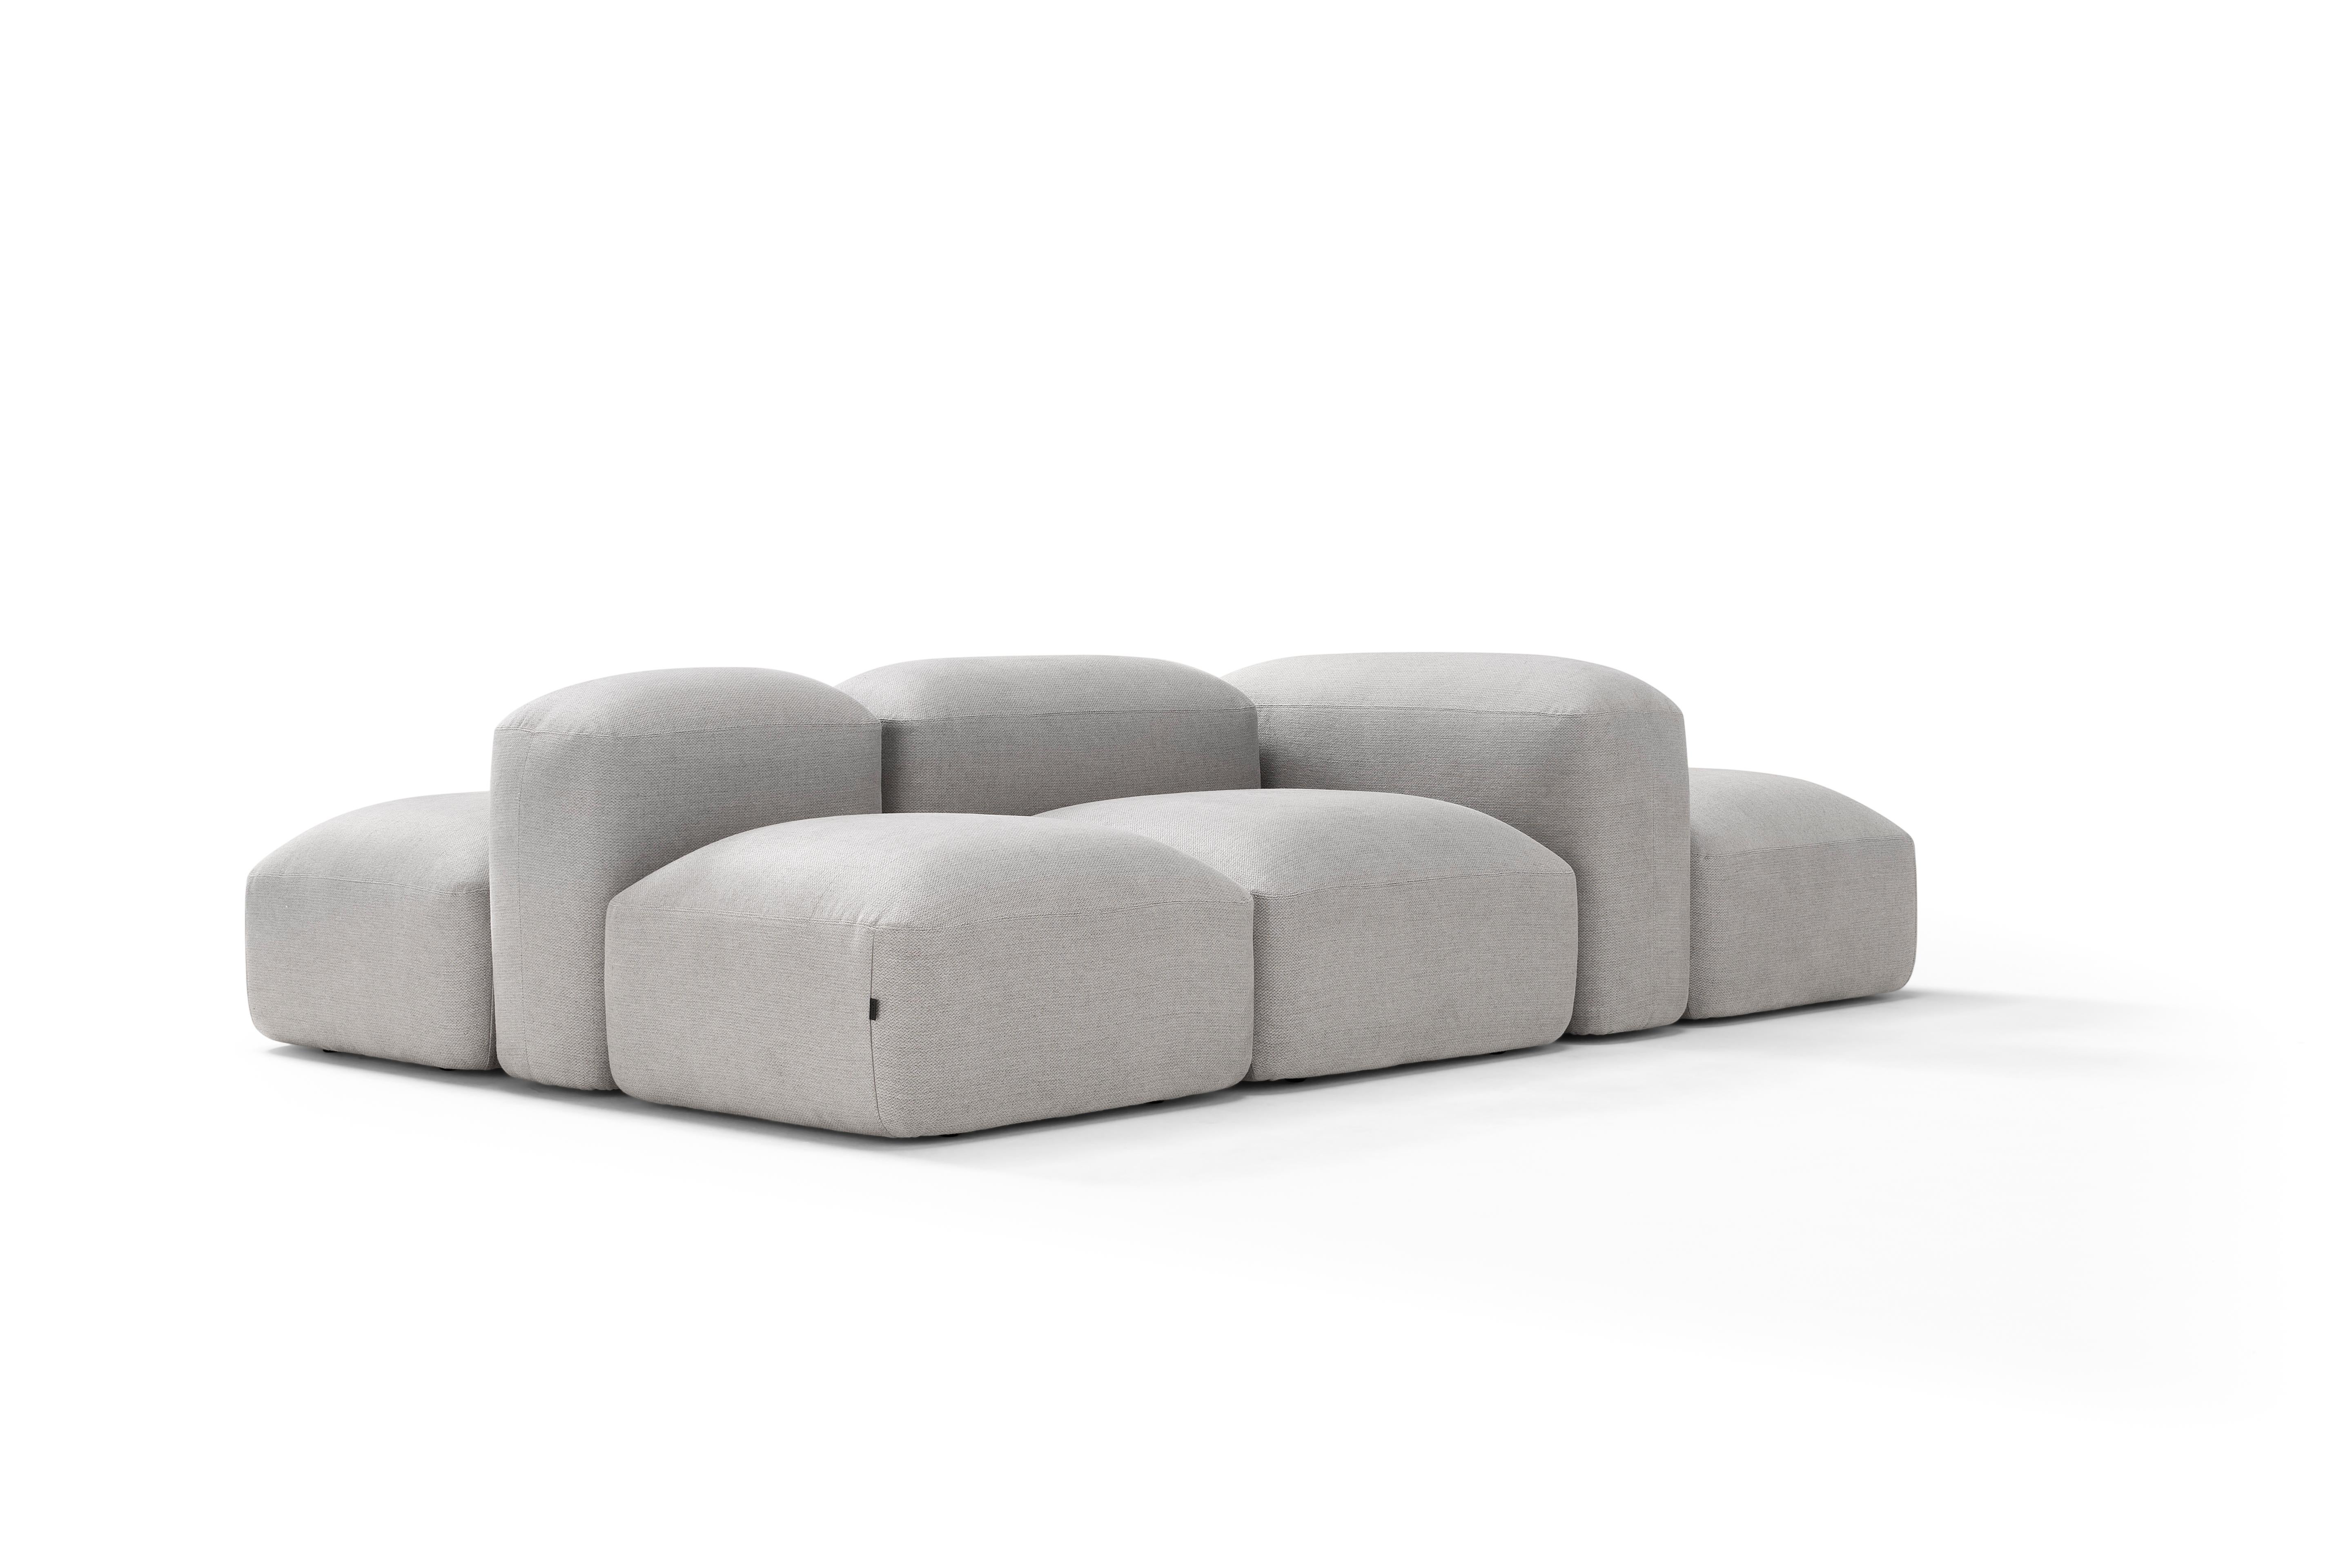 Organic Modern Modular and Customizable Sofa 'Lapis' E027 'Many Layouts and Fabrics Available' For Sale